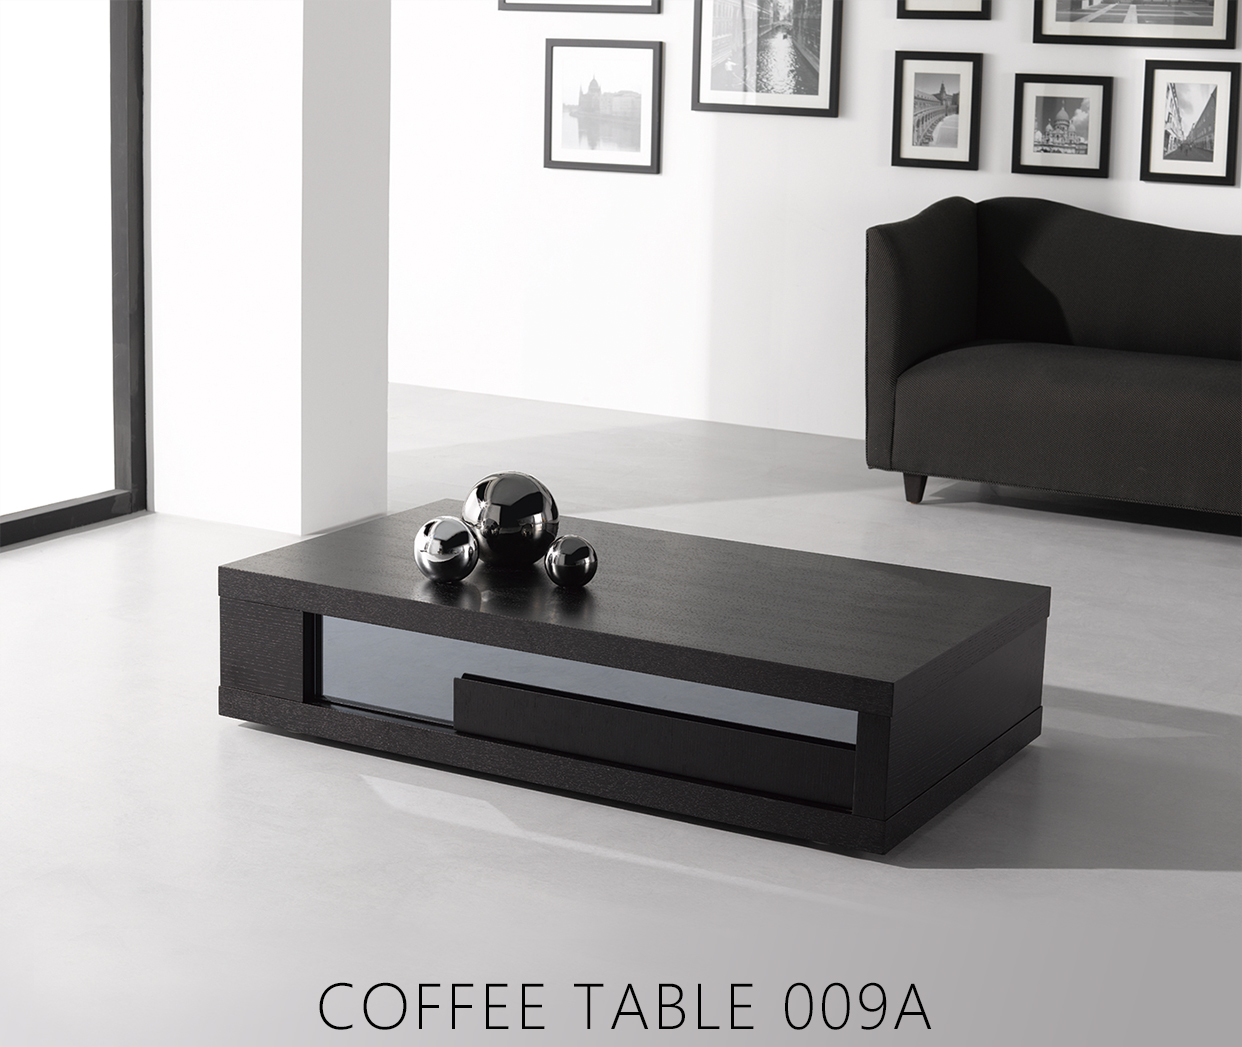 COFFEE TABLE 009A